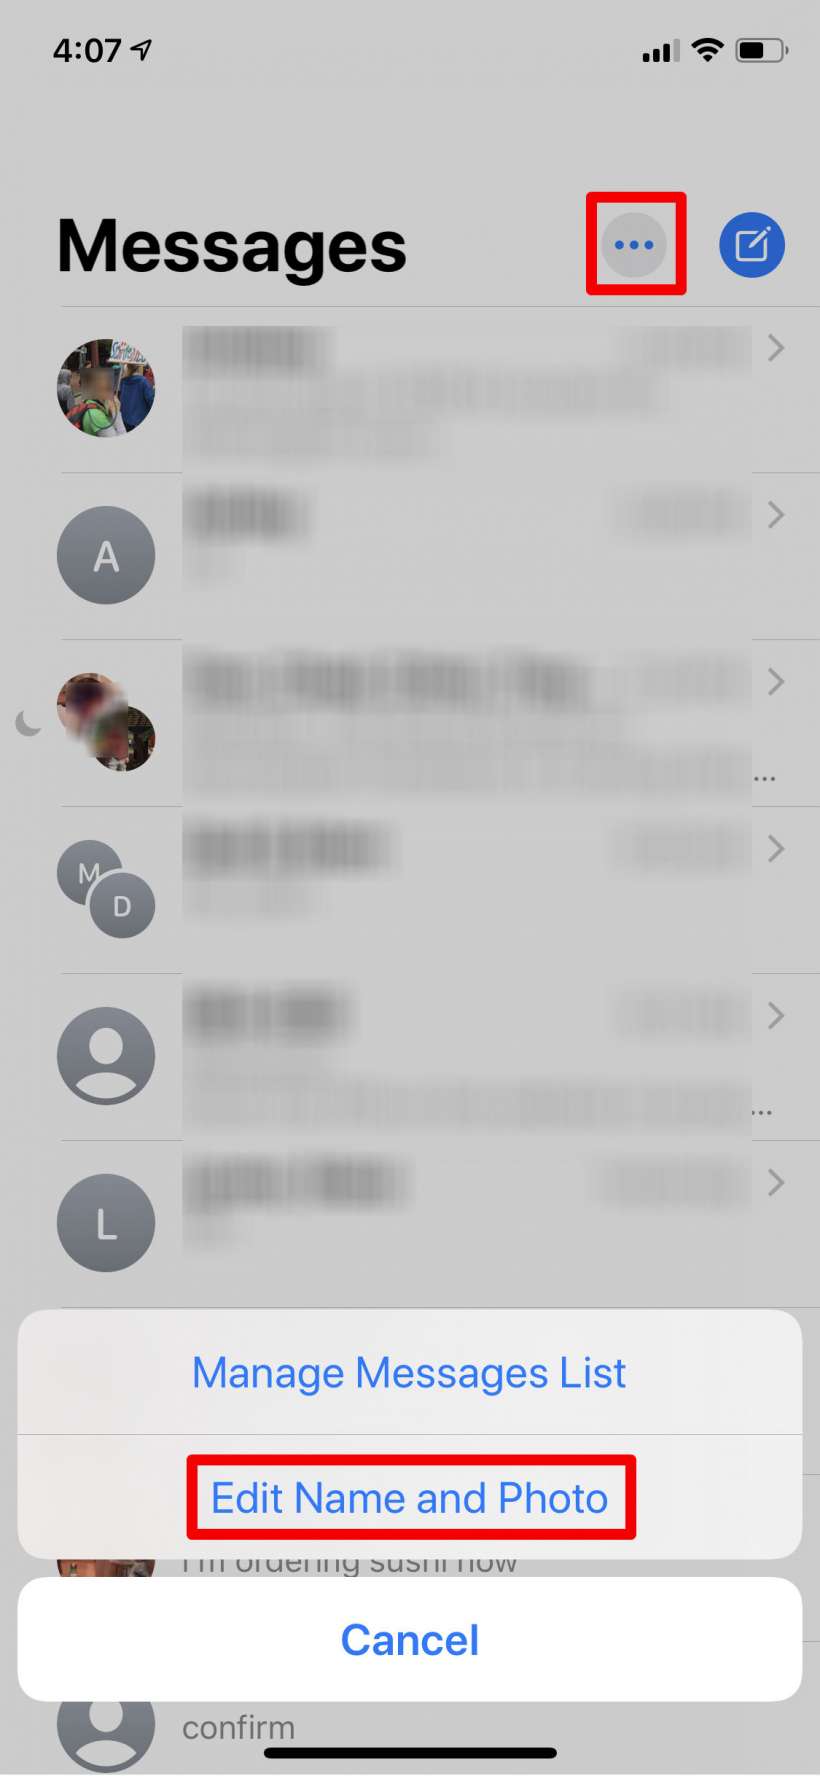 How to stop Messages from asking if you want to share your name and photo on iPhone and iPad.